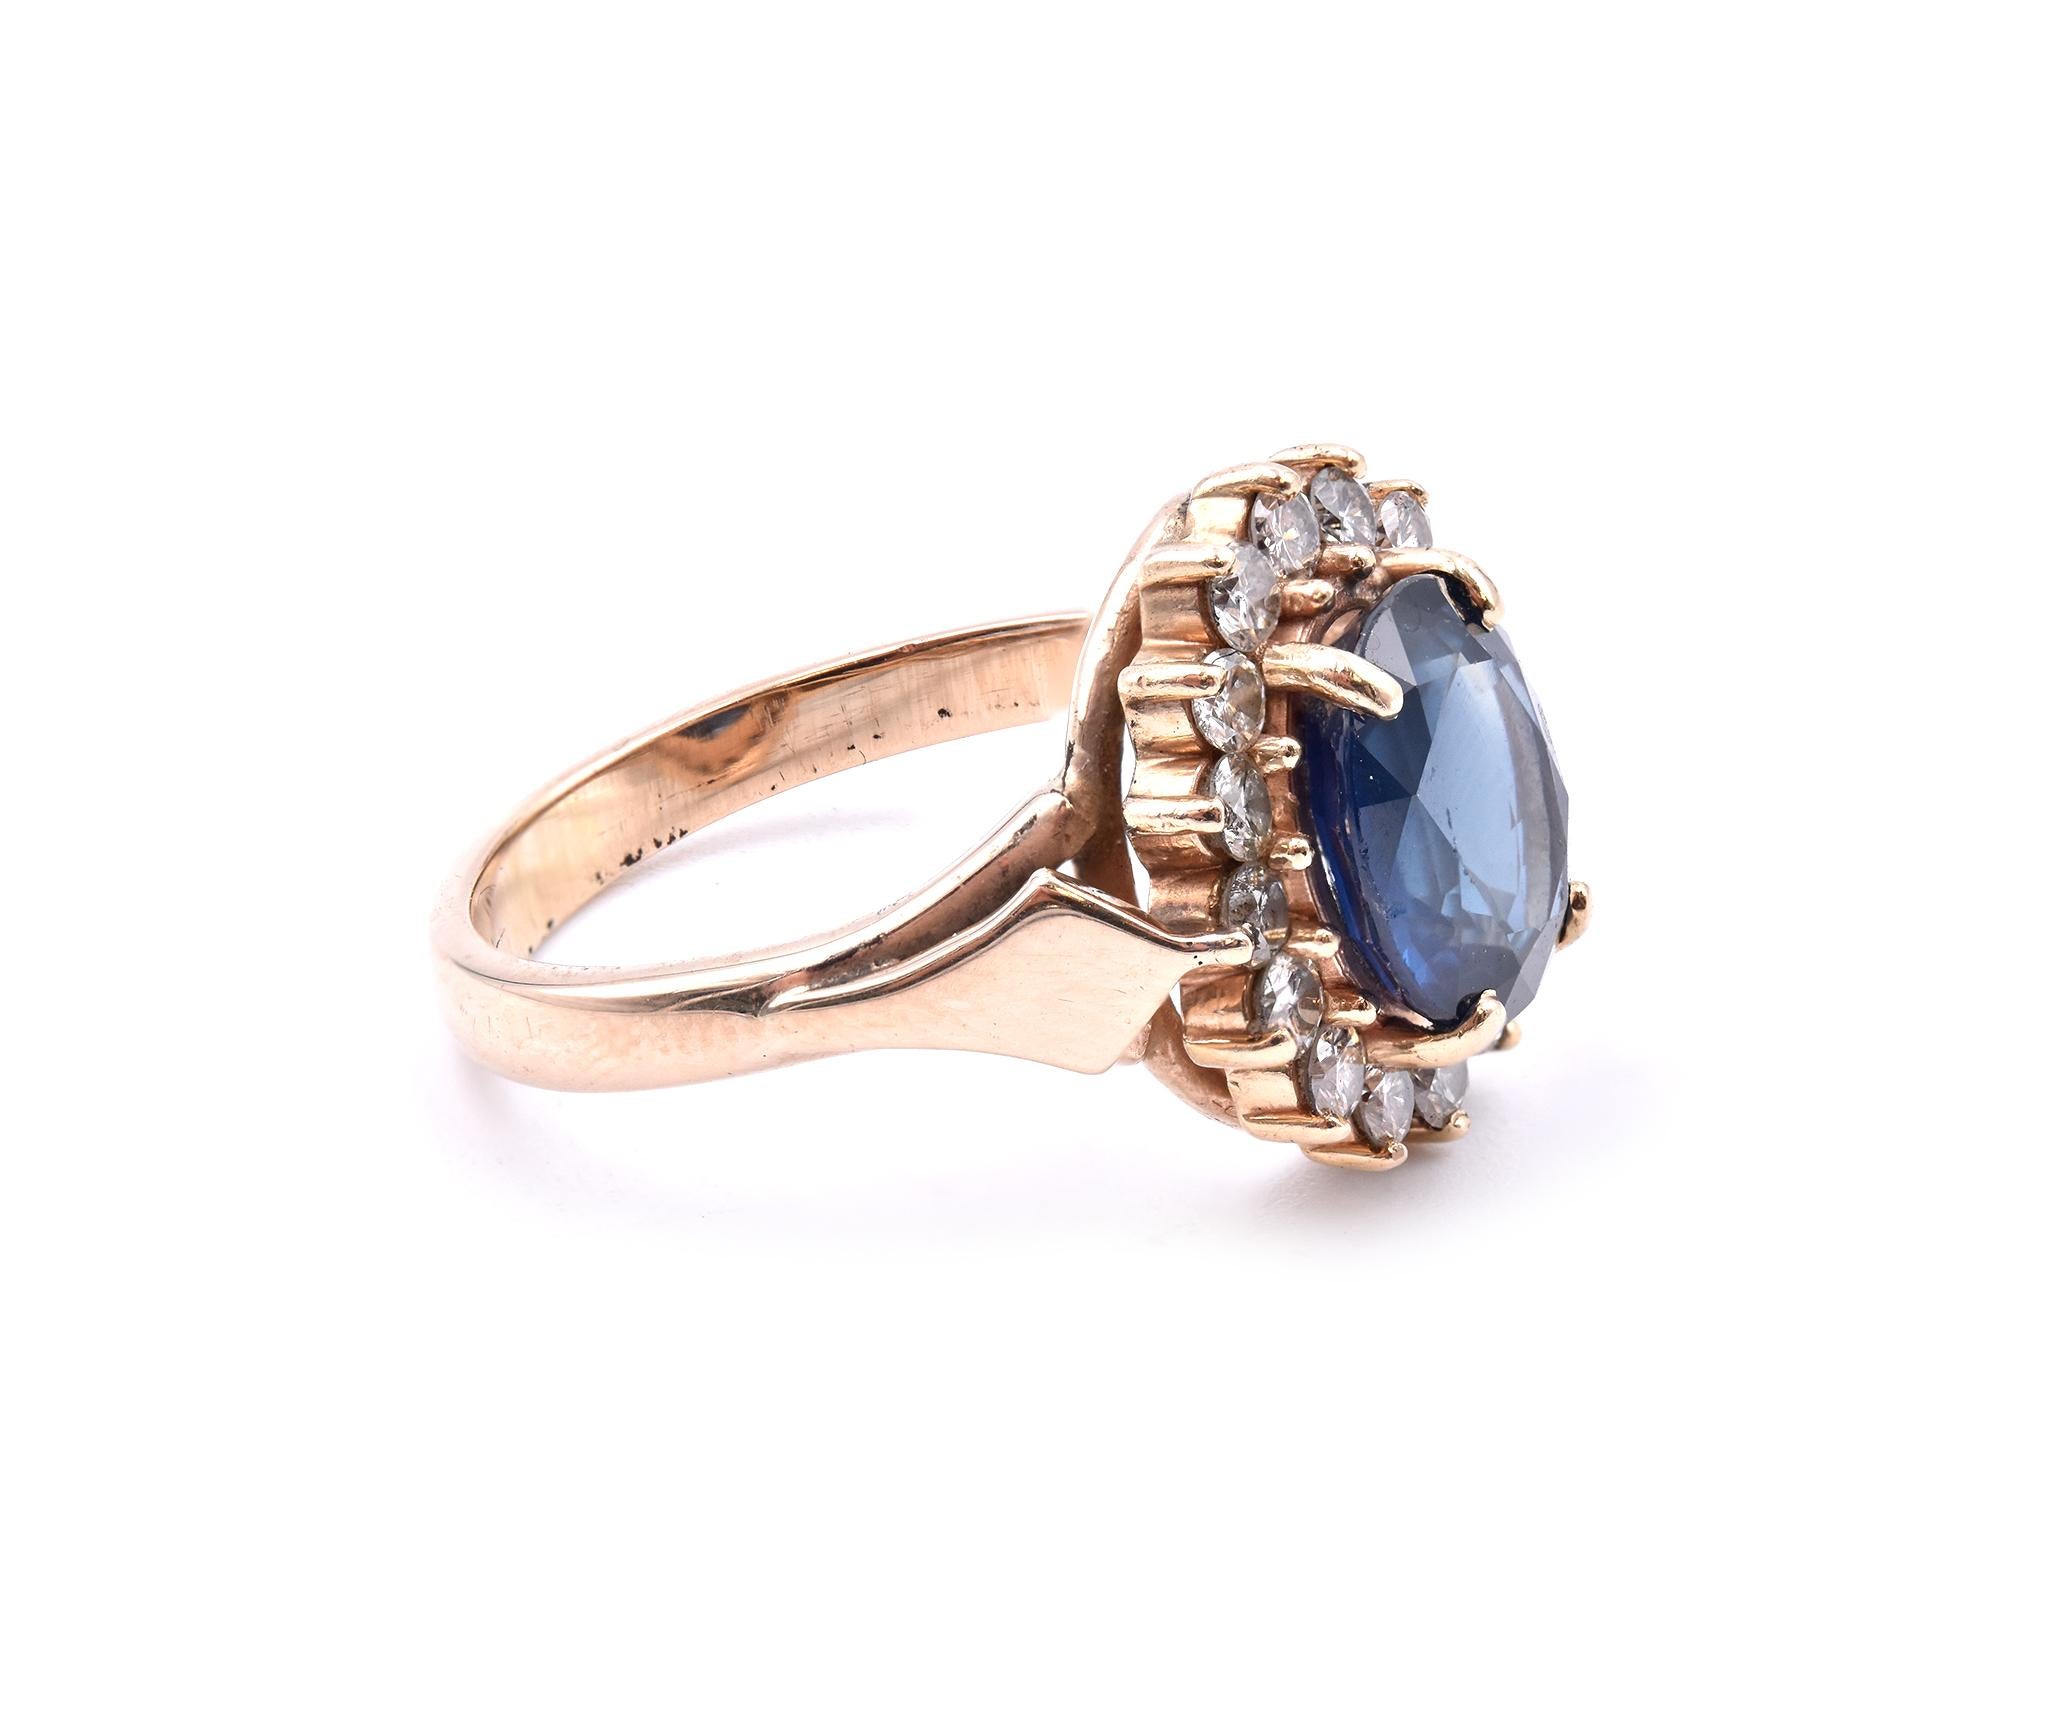 Designer: custom
Material: 14K yellow gold 
Sapphire: 1 oval cut = 2.80ct
Diamond: 16 round cut = .60cttw
Color: I
Clarity: VS2
Ring Size: 7.5 (please allow up to 2 additional business days for sizing requests)
Dimensions: ring shank measures